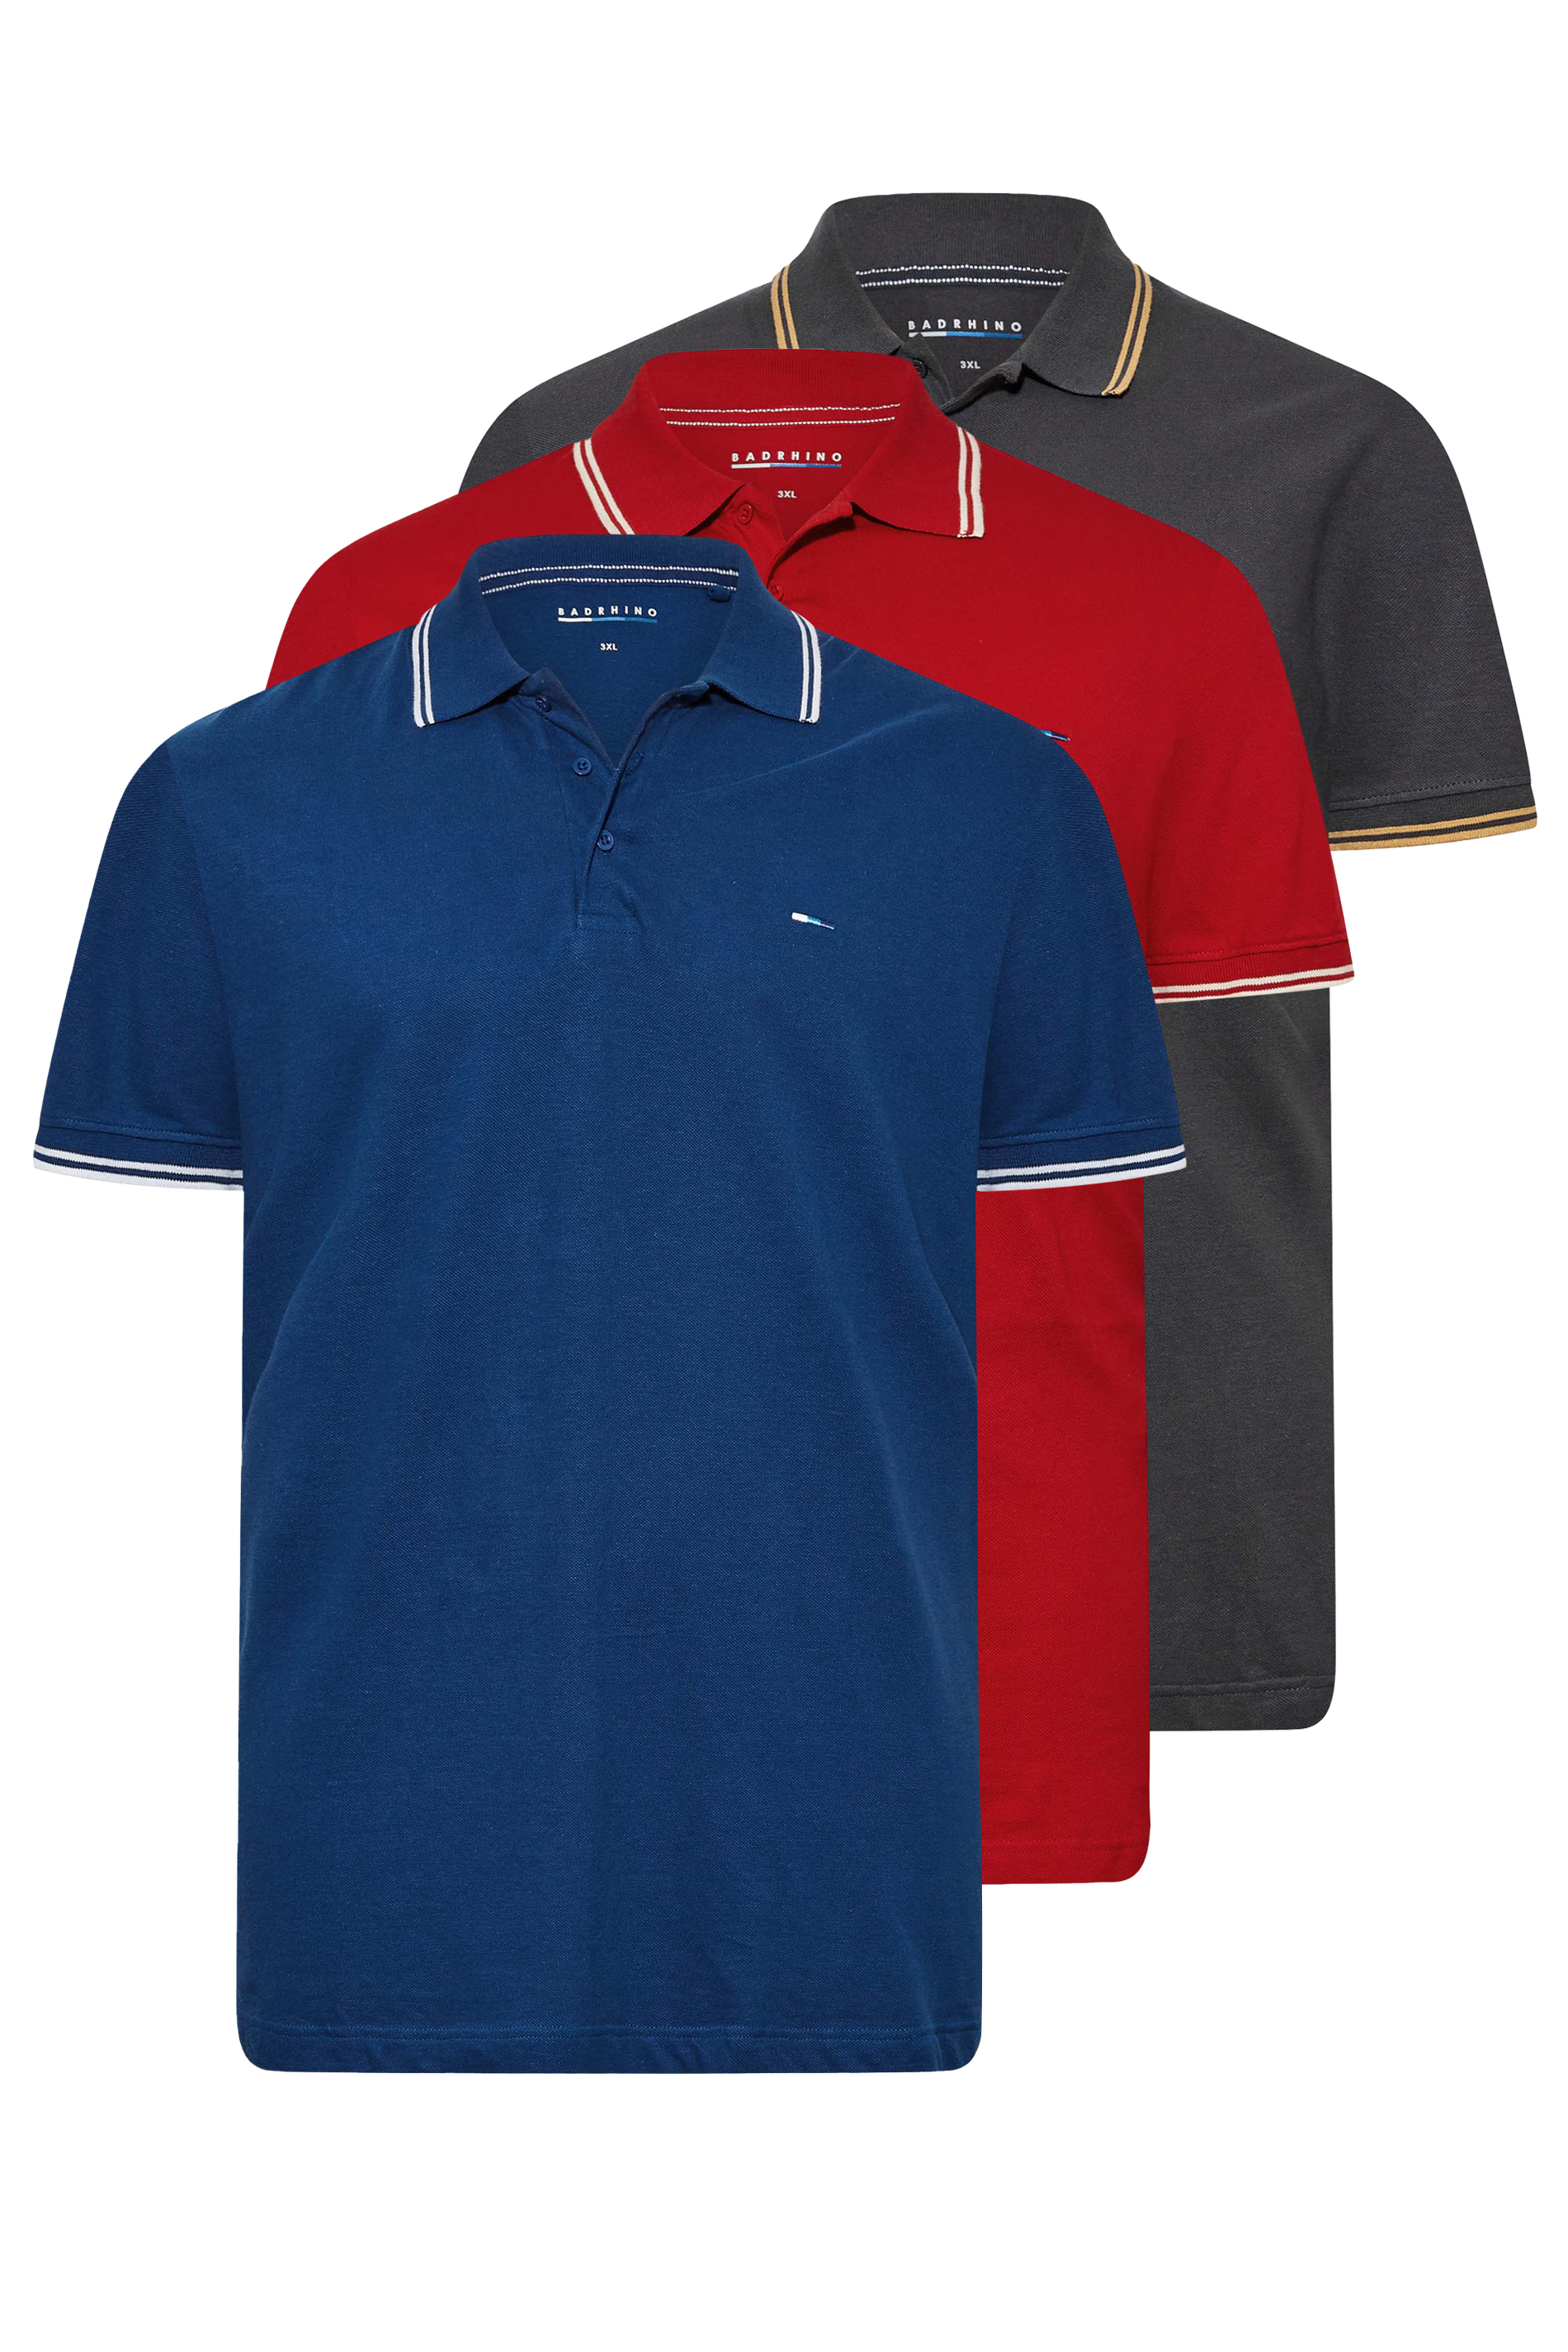 BadRhino Big & Tall Blue & Red 3 Pack Tipped Polo Shirts 1